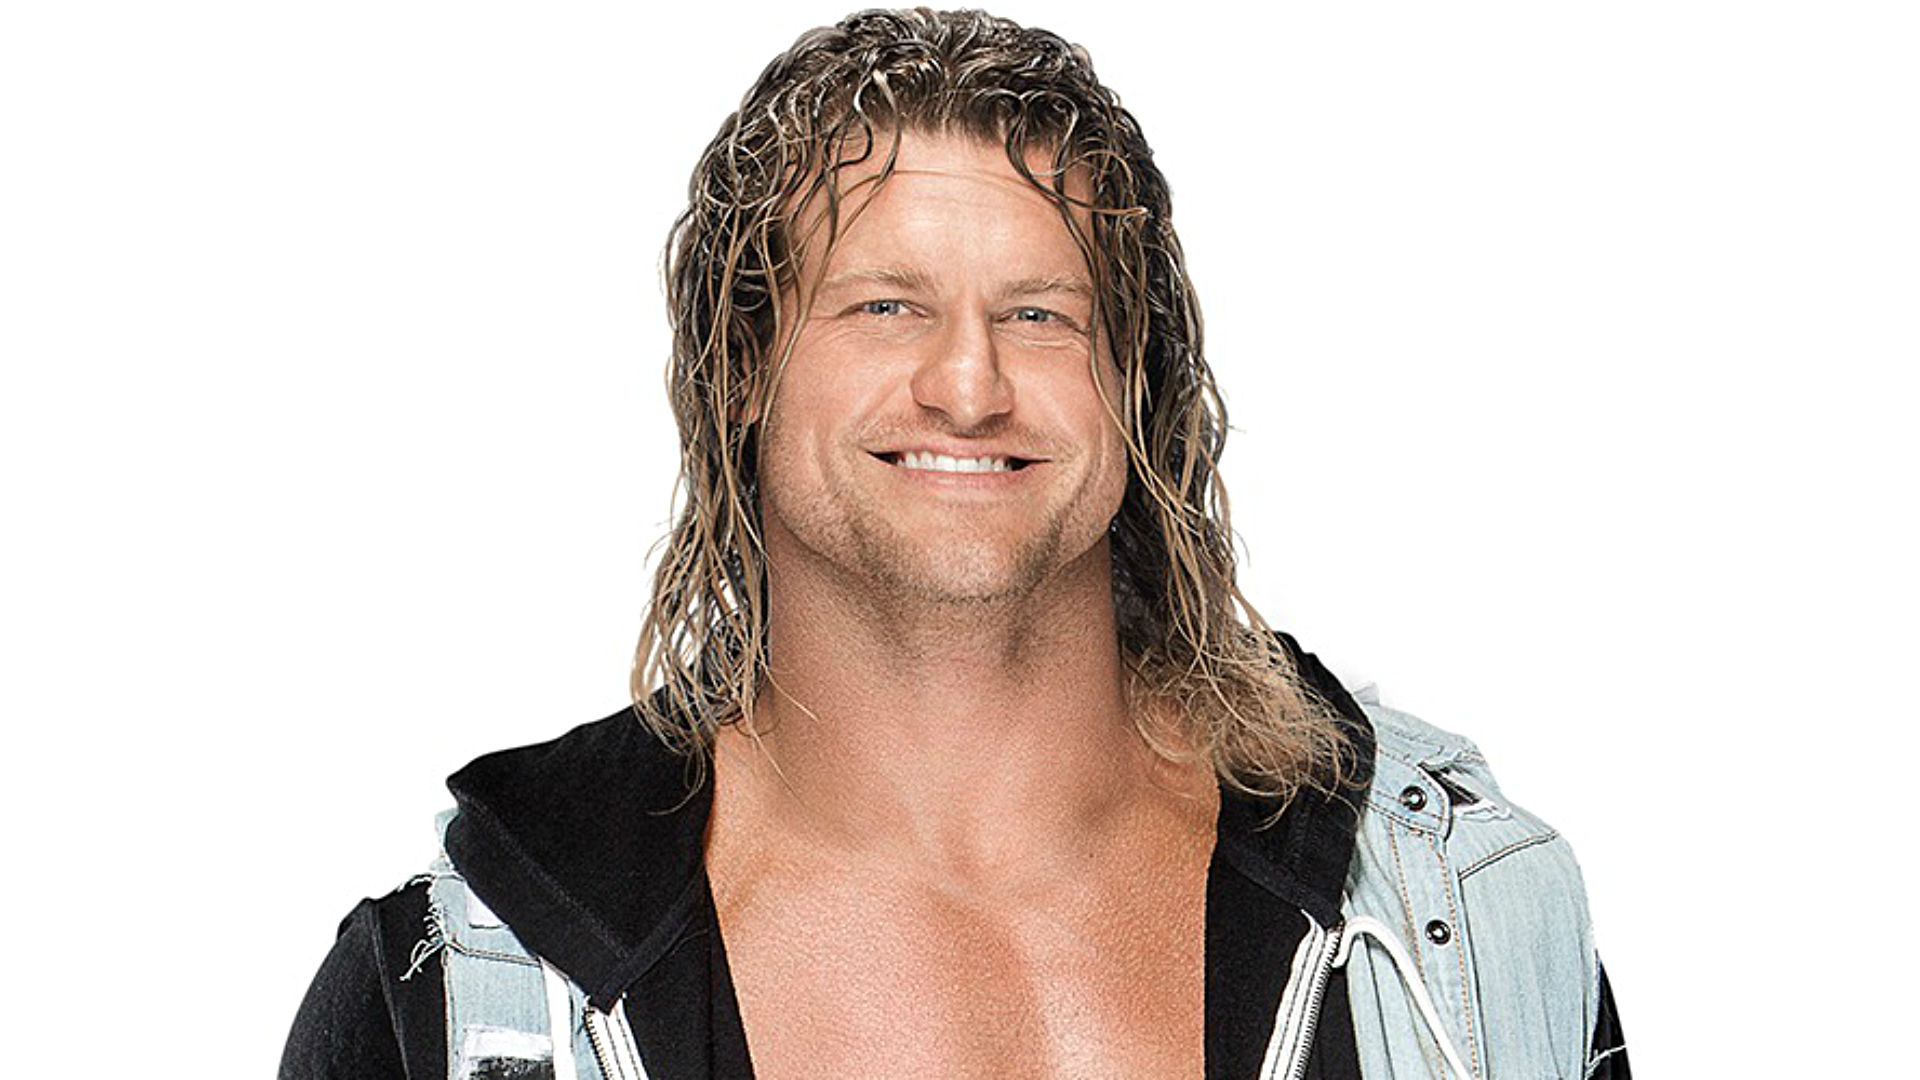 Wwe 'no Mercy 2016' - Dolph Ziggler Pic Wwe , HD Wallpaper & Backgrounds